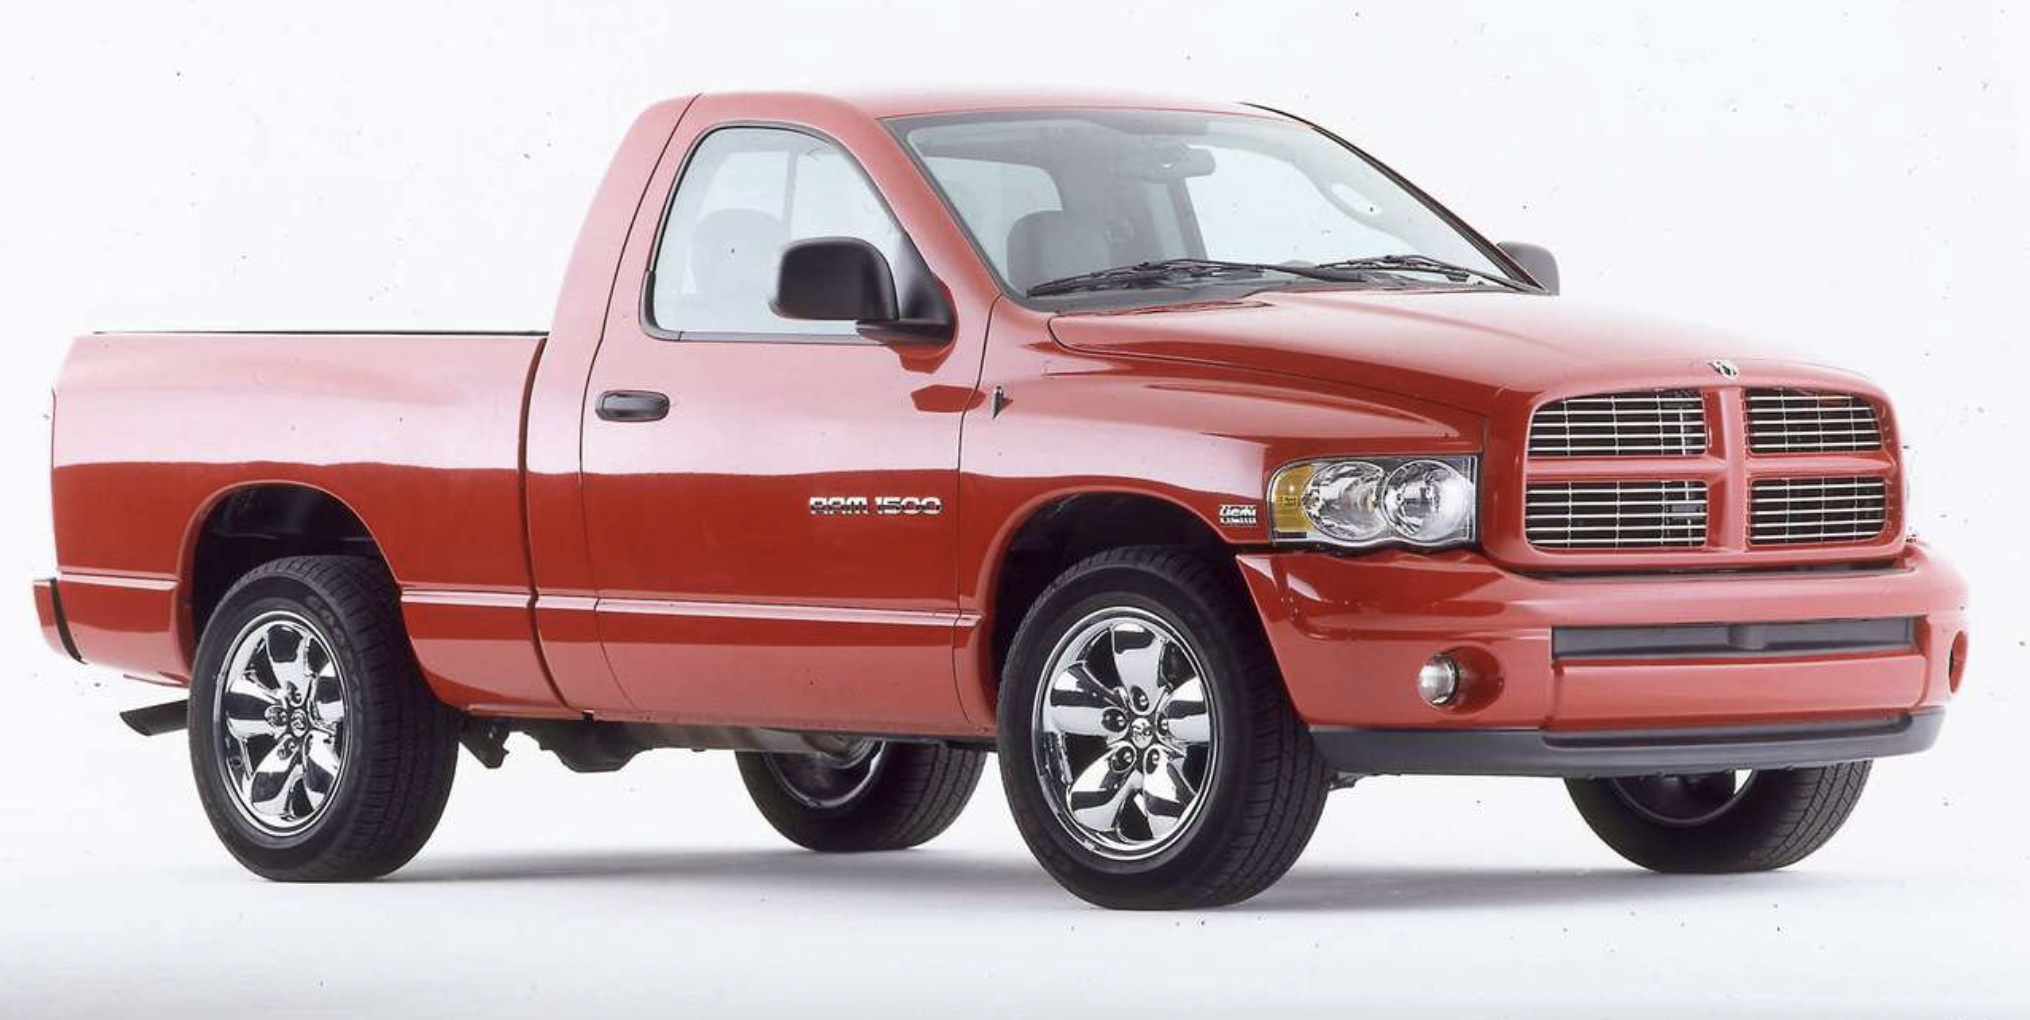 NHTSA Issues Do-Not-Drive Order for 2003 Dodge Ram 1500